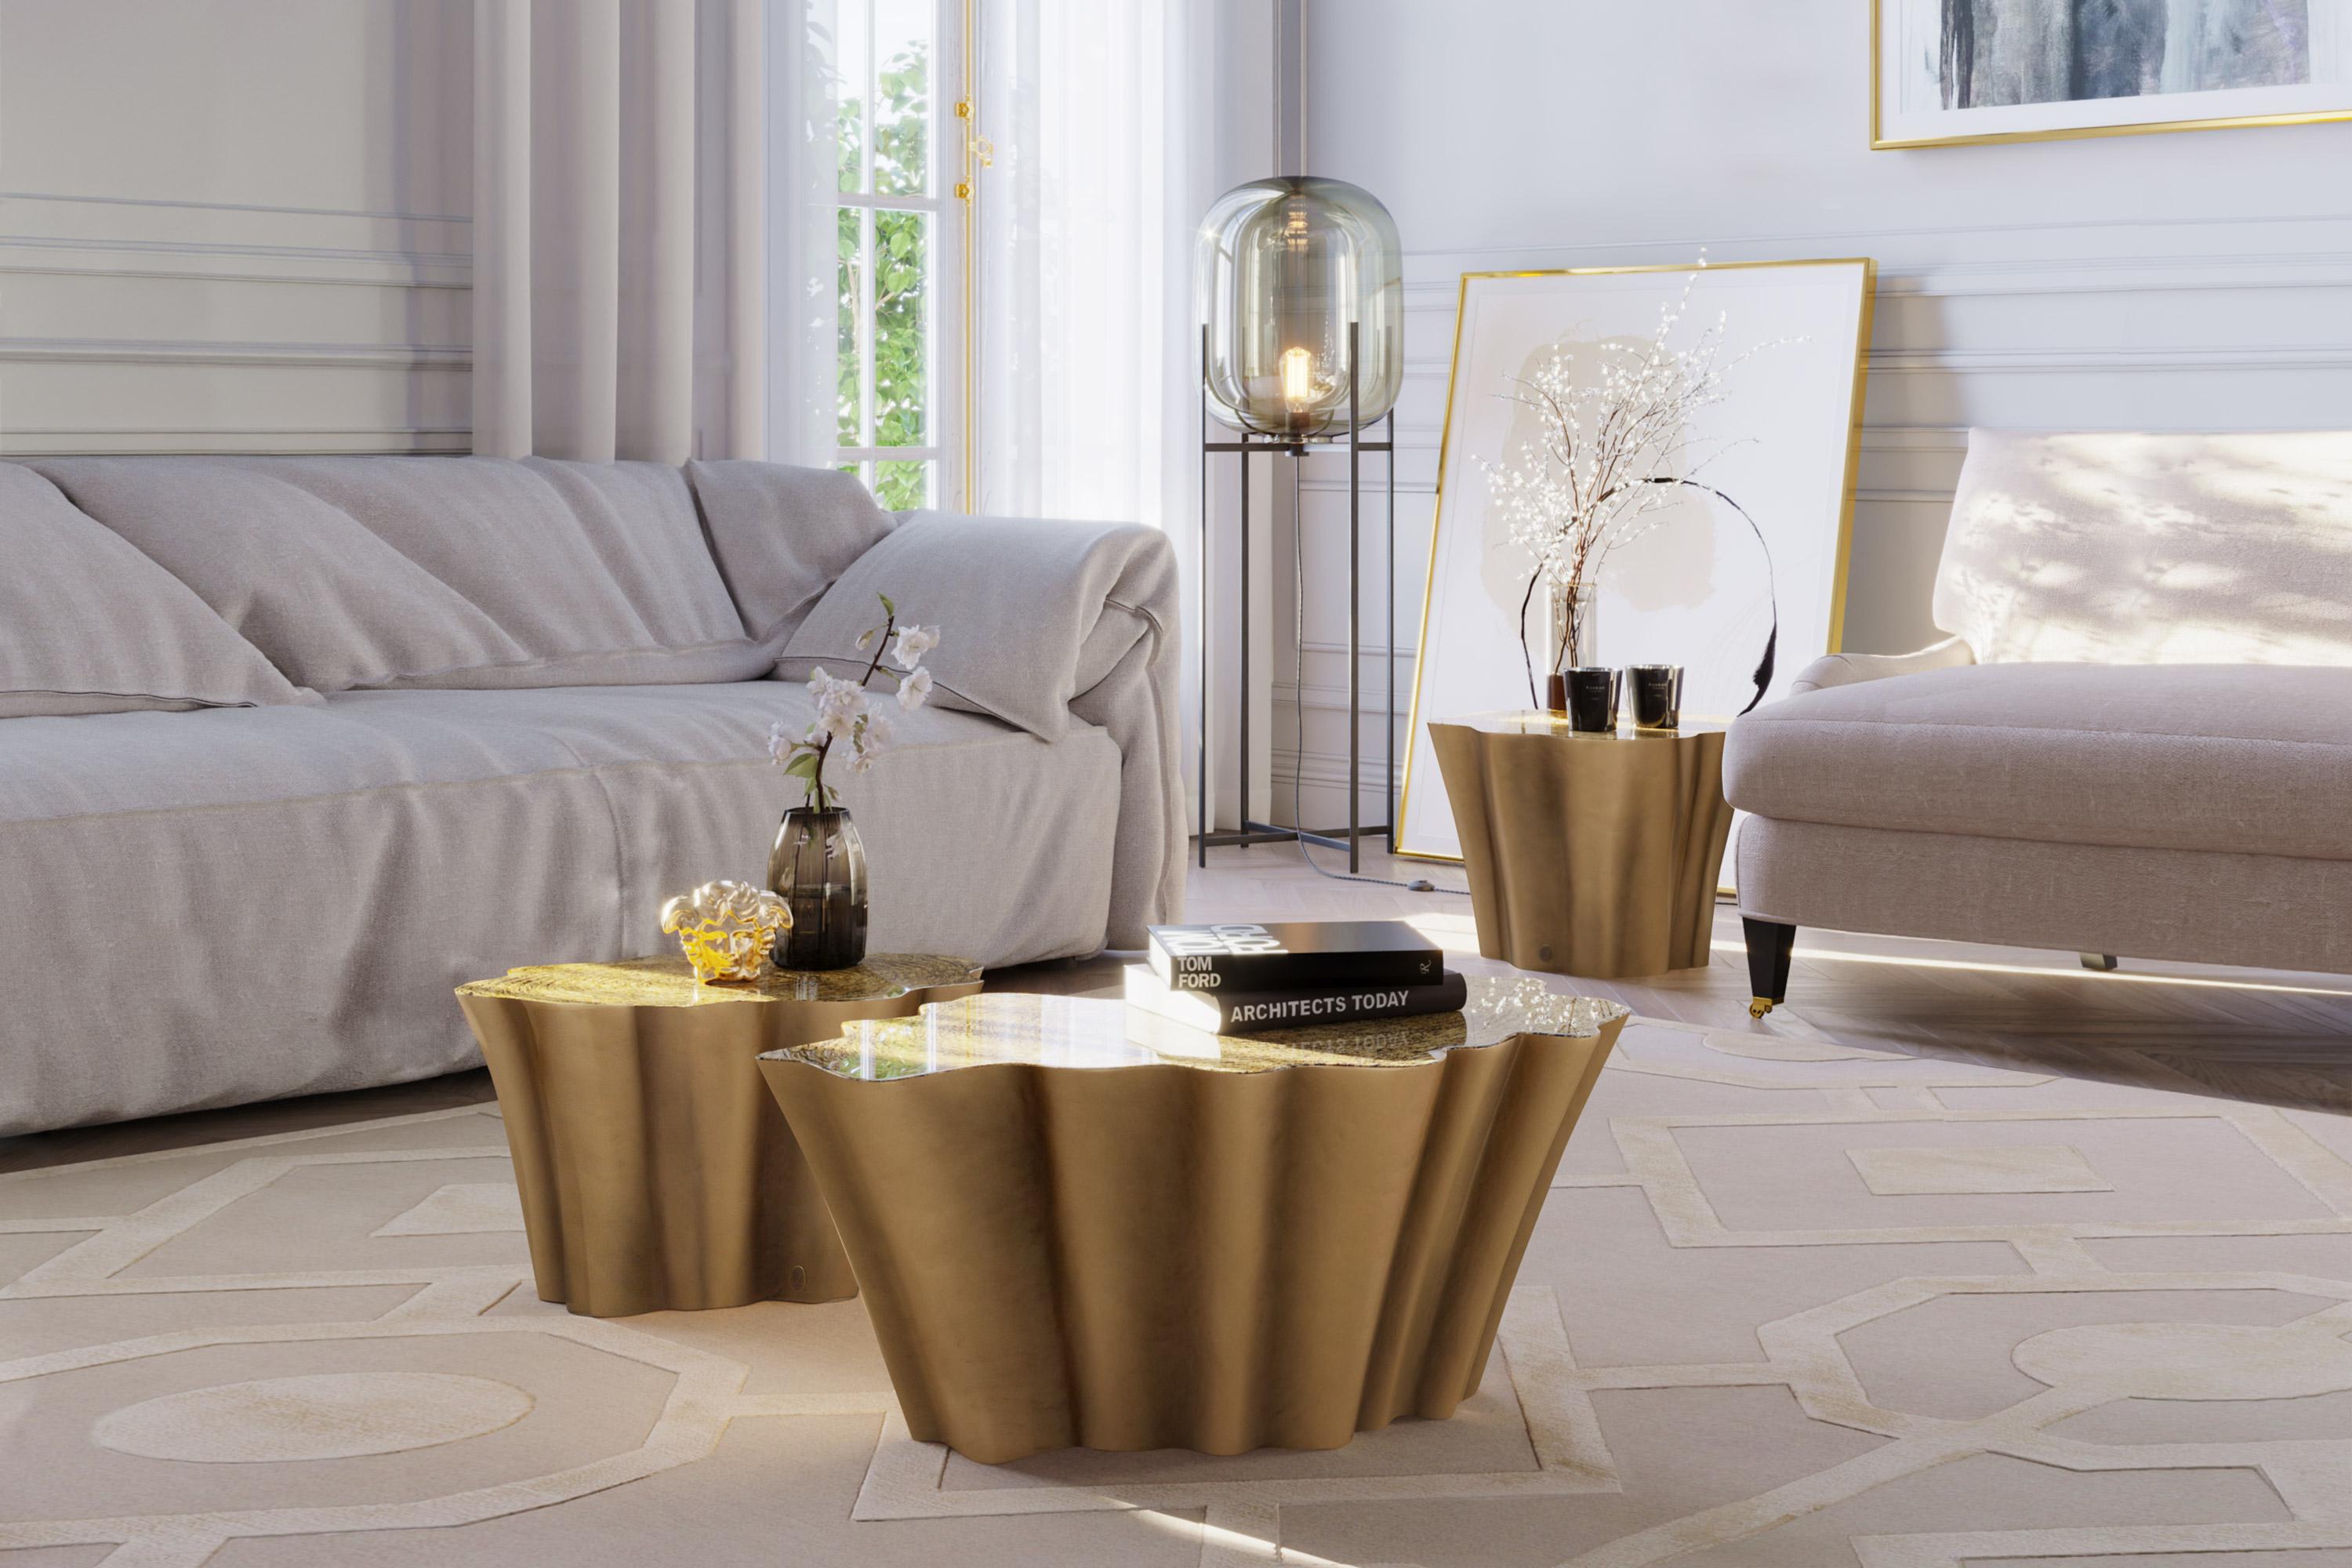 Gaia is a set of coffee tables with a tree trunk inspired shapes that combine luxurious finishes with exclusive textures.
Its table top is in textured gold leaf finish covered by clear resin and its structure is finished in aged pale gold. Its